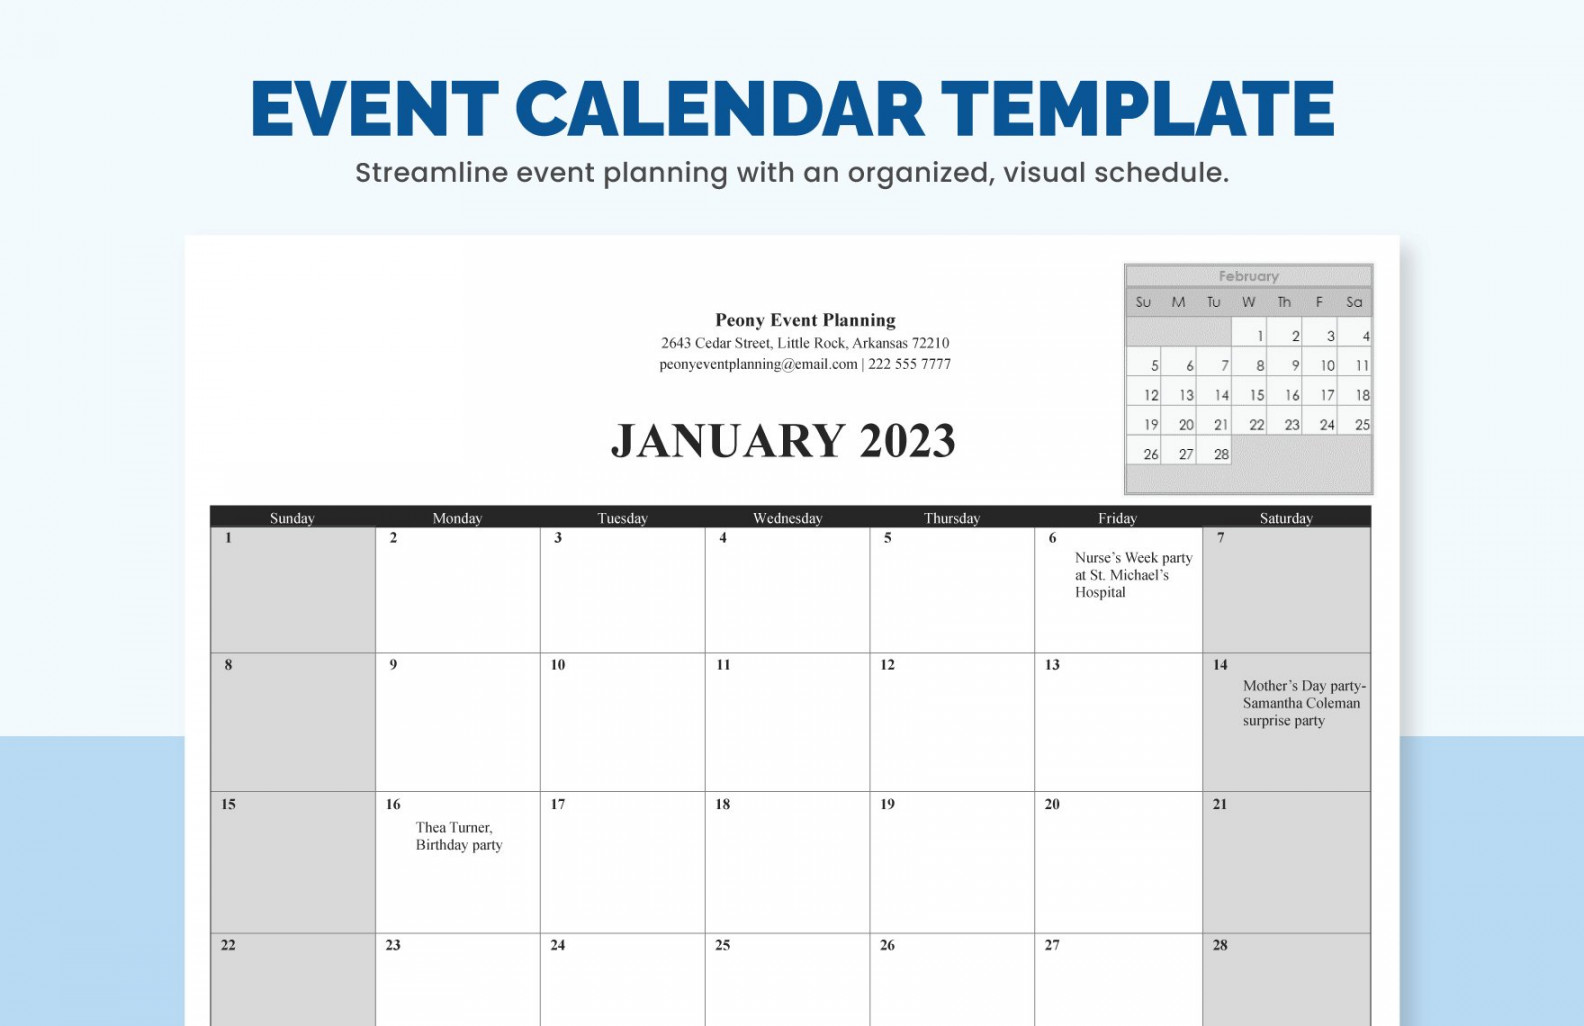 Event Calendar Templates - Download in Excel, Google Sheets